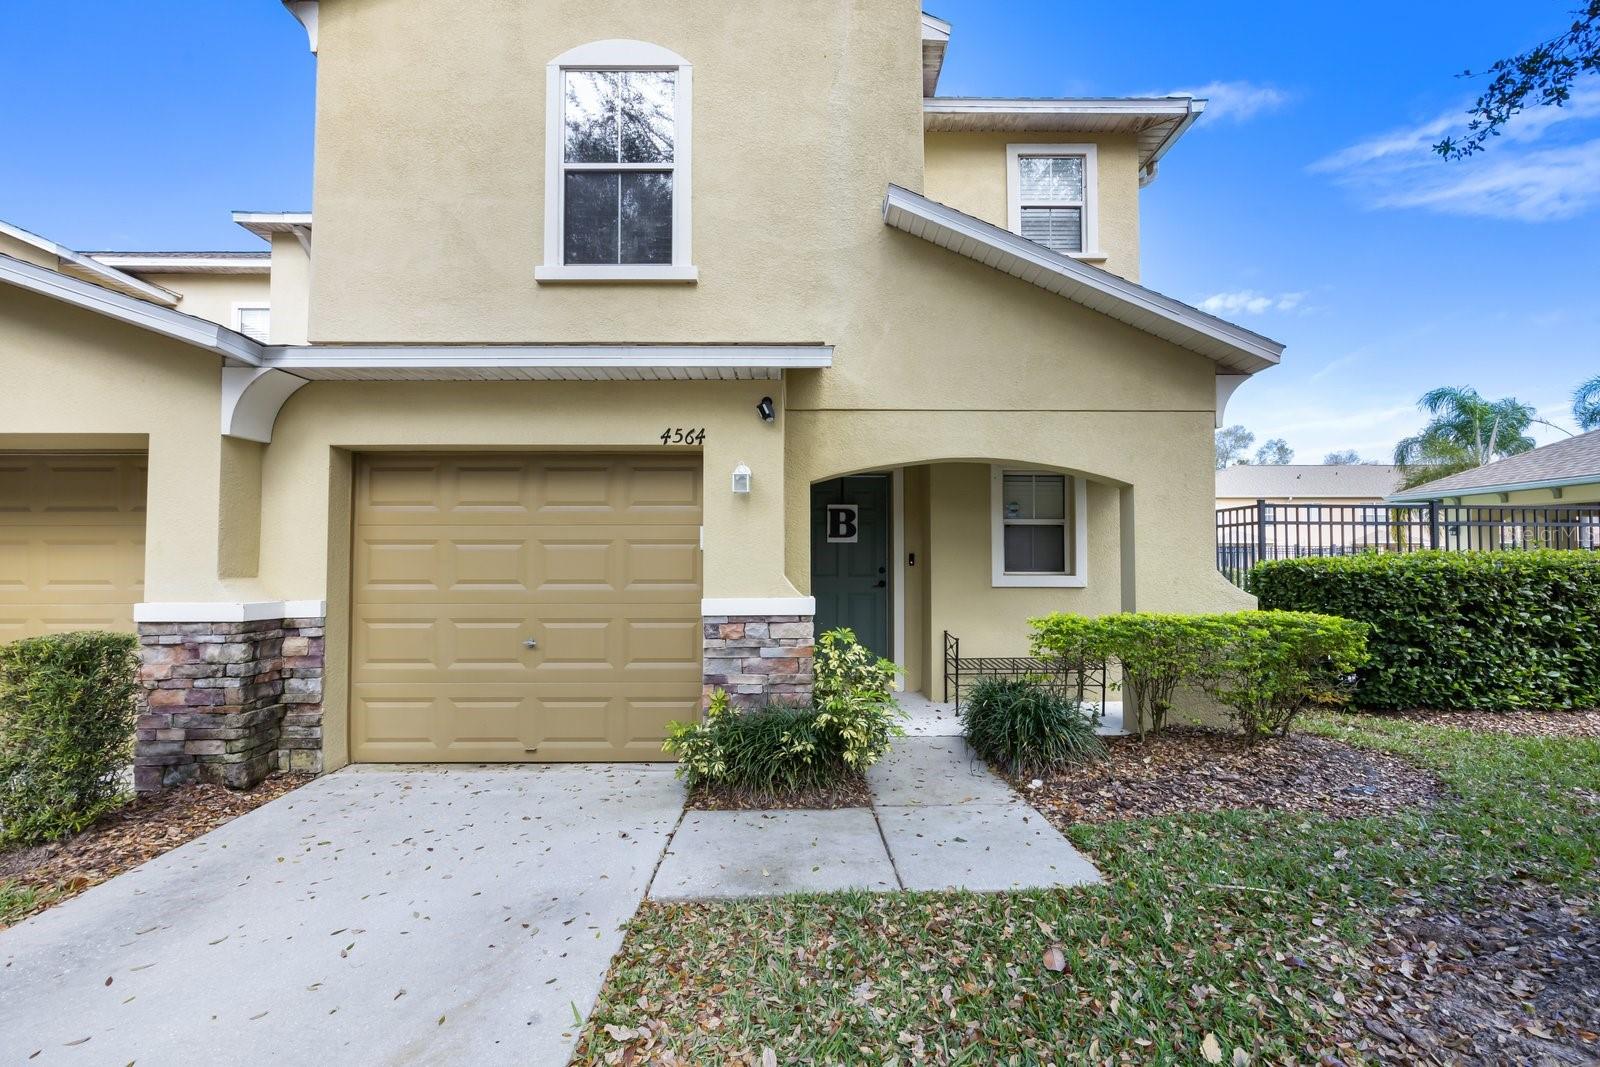 View TAMPA, FL 33610 townhome